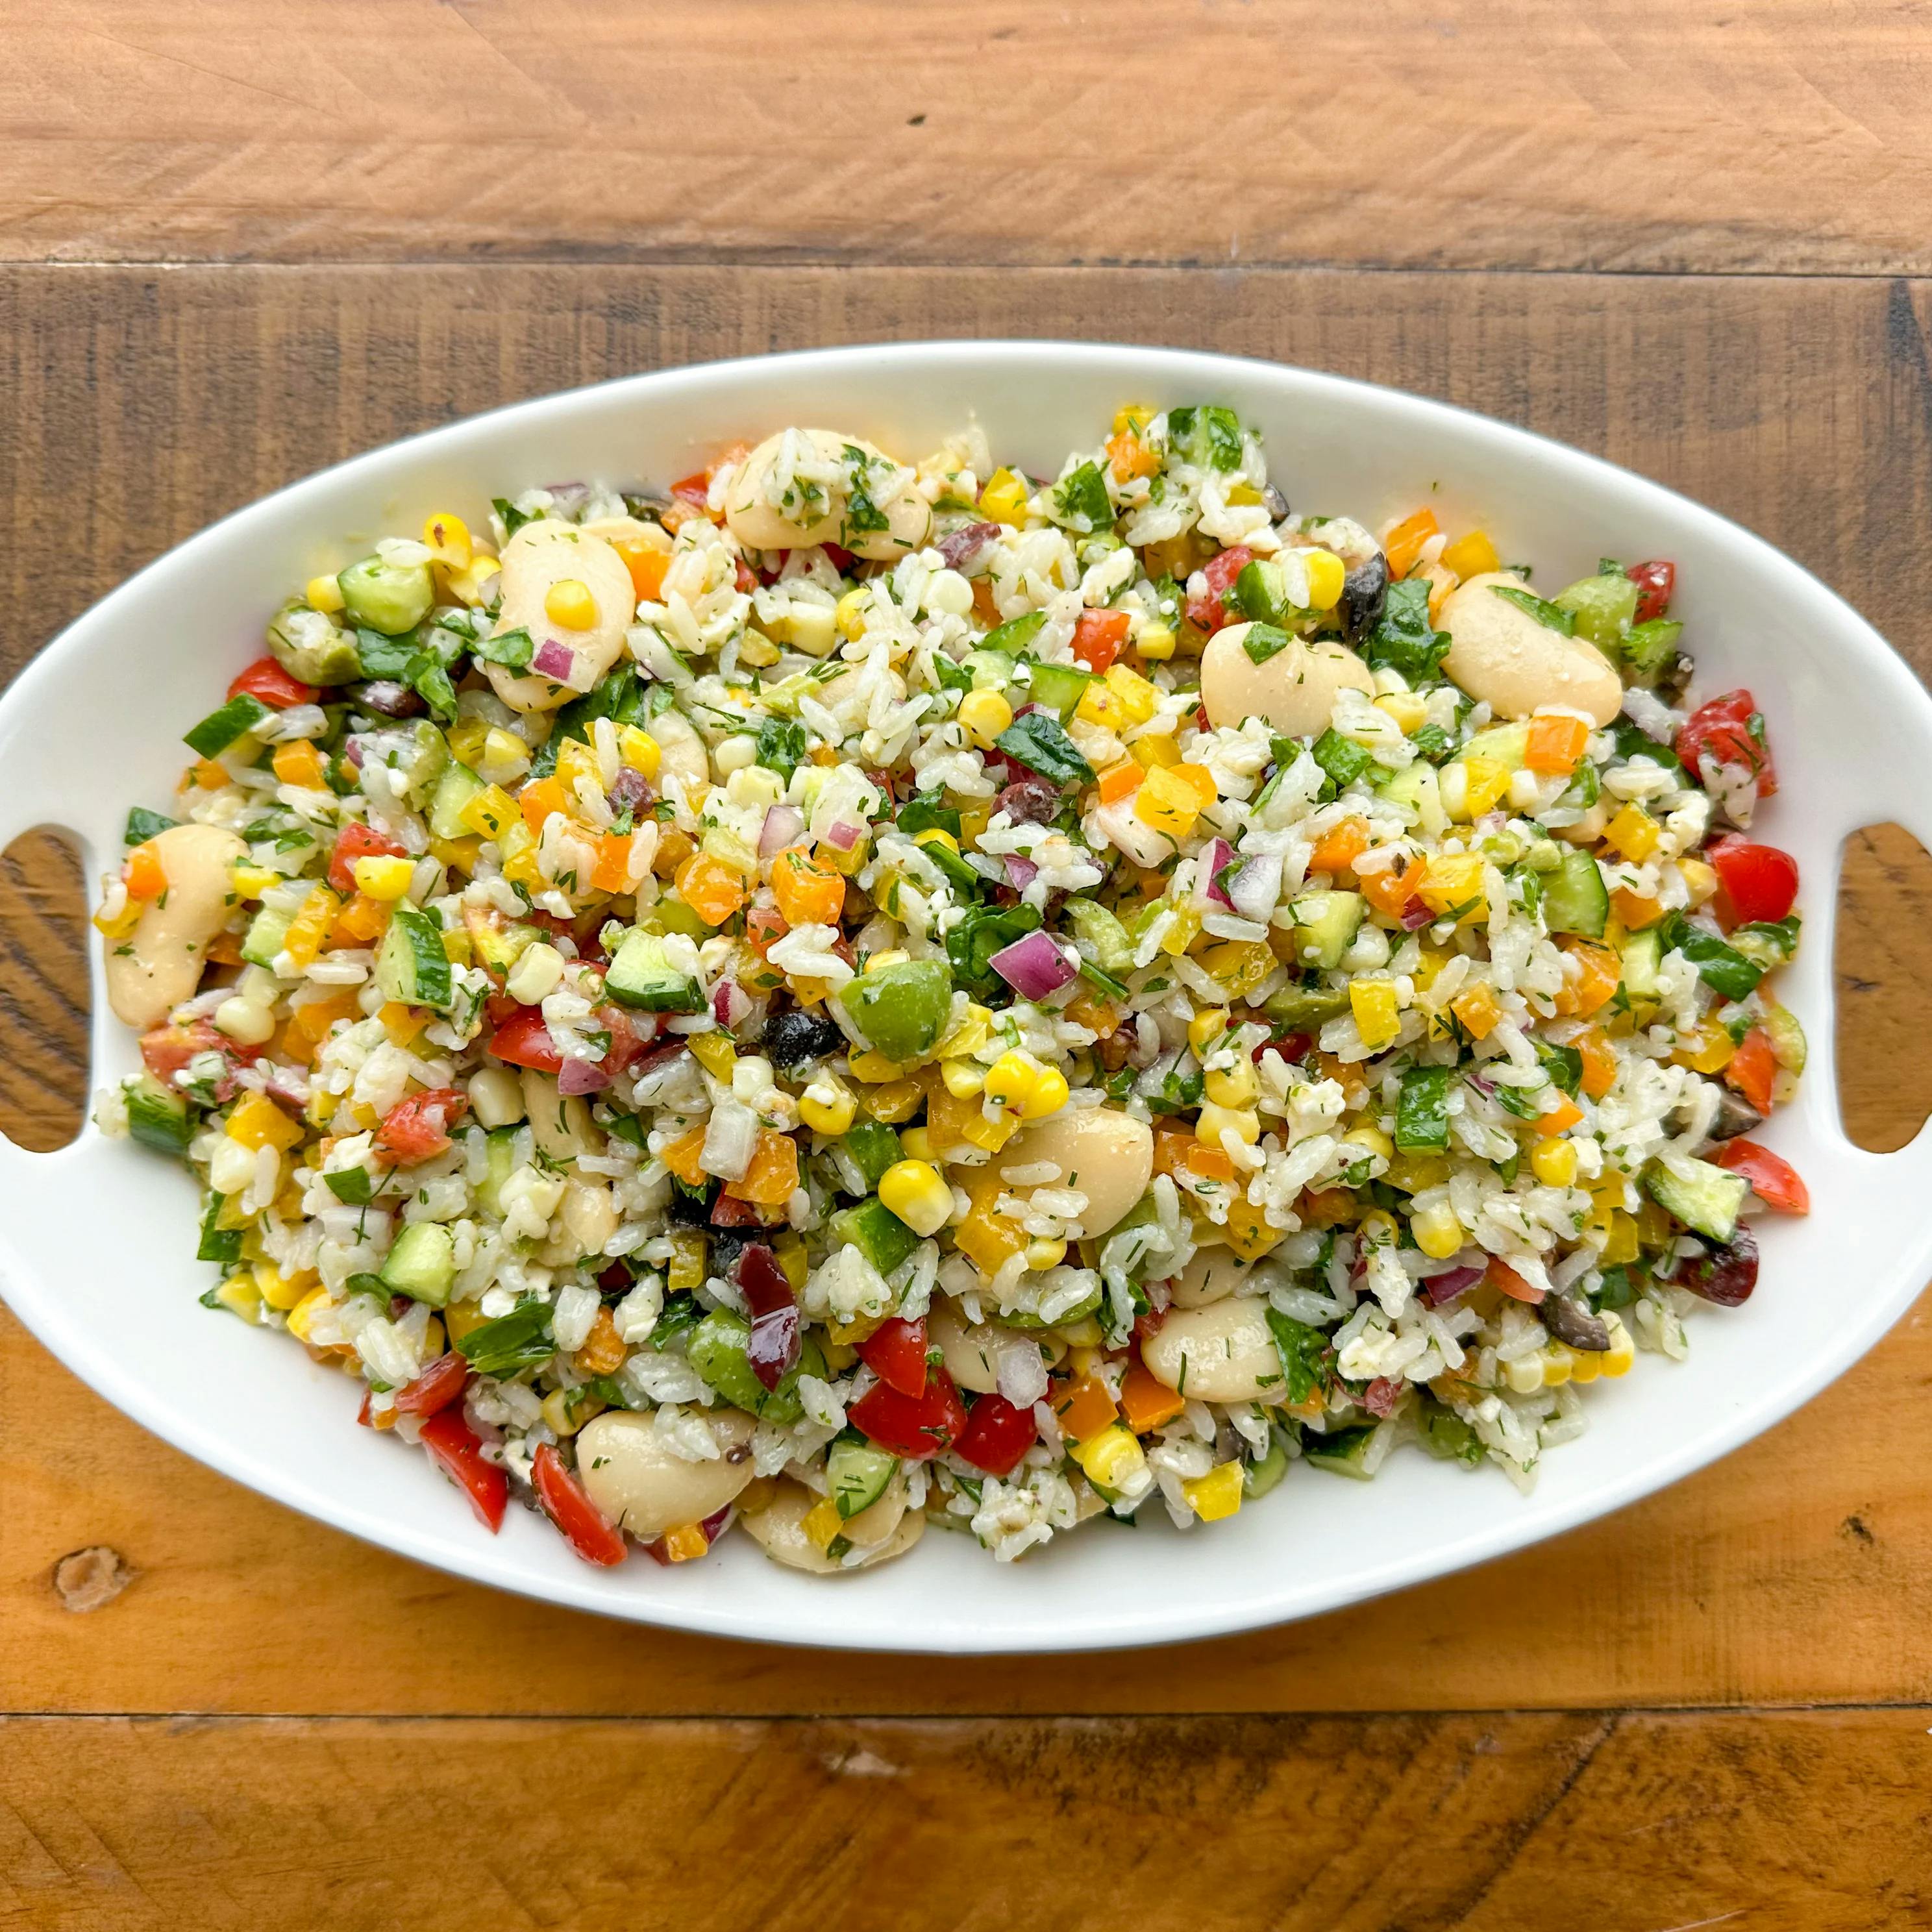 Picture for Mediterranean Rice Salad